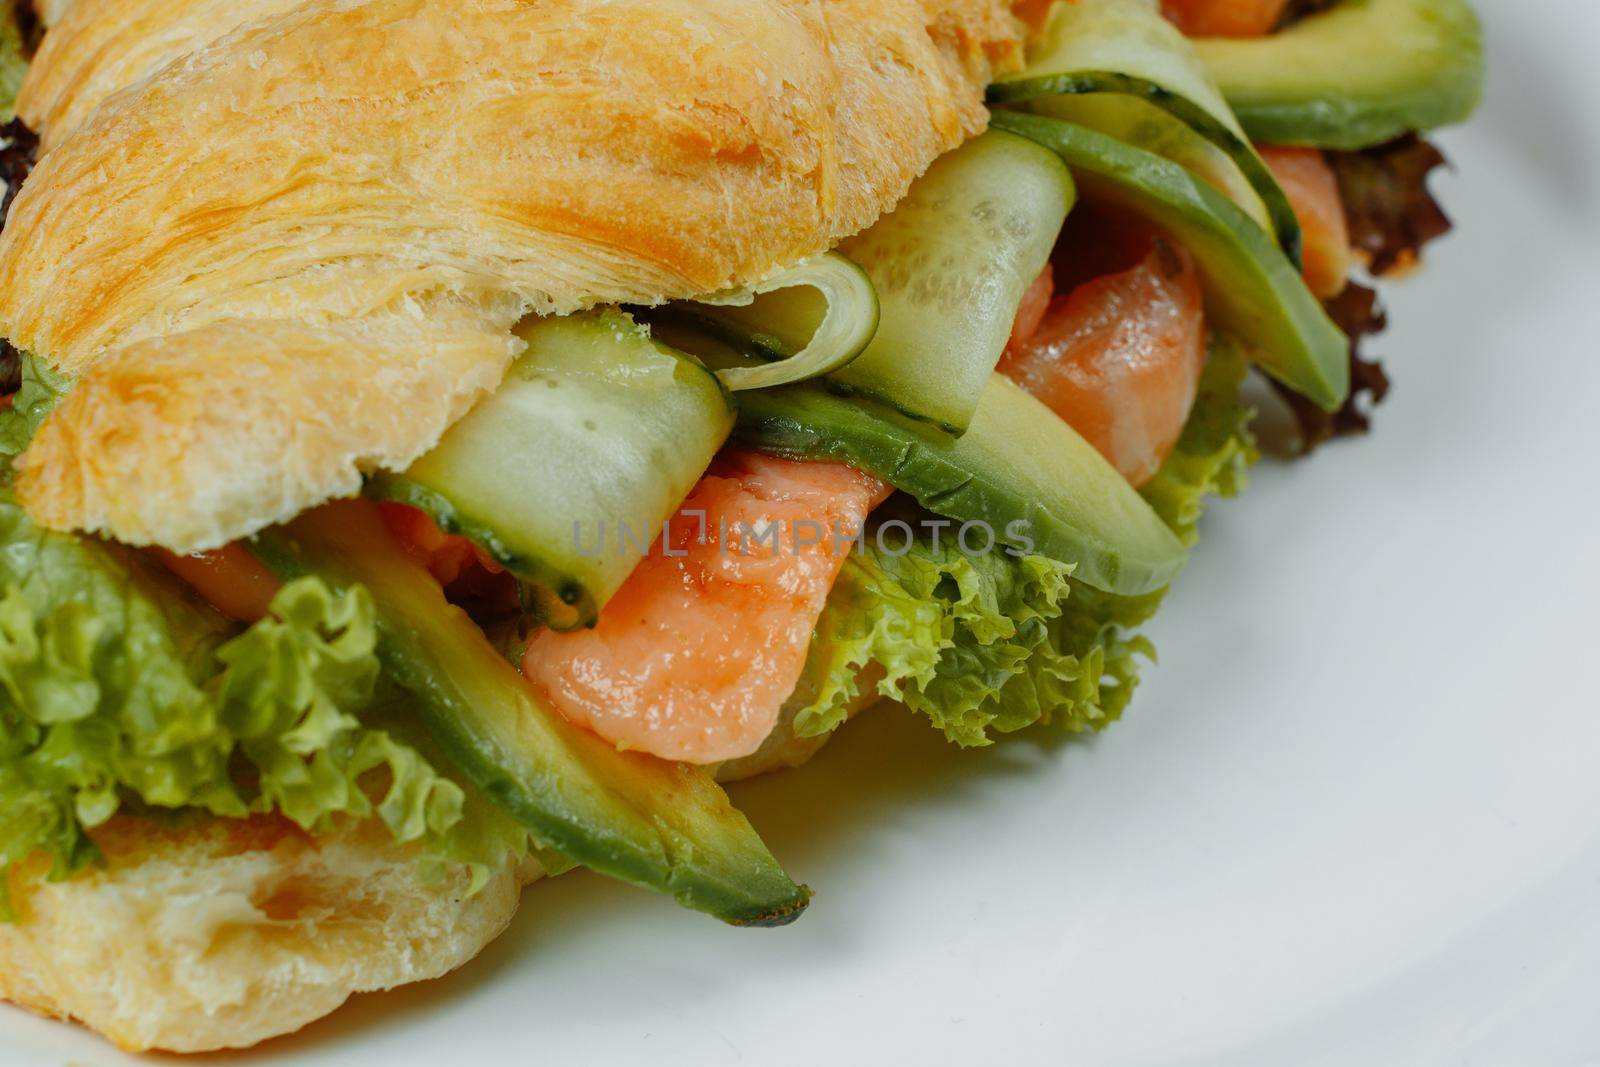 Croissant sandwich with red fish, avocado, fresh vegetables and arugula on black shale board over black stone background. Healthy food concept by UcheaD